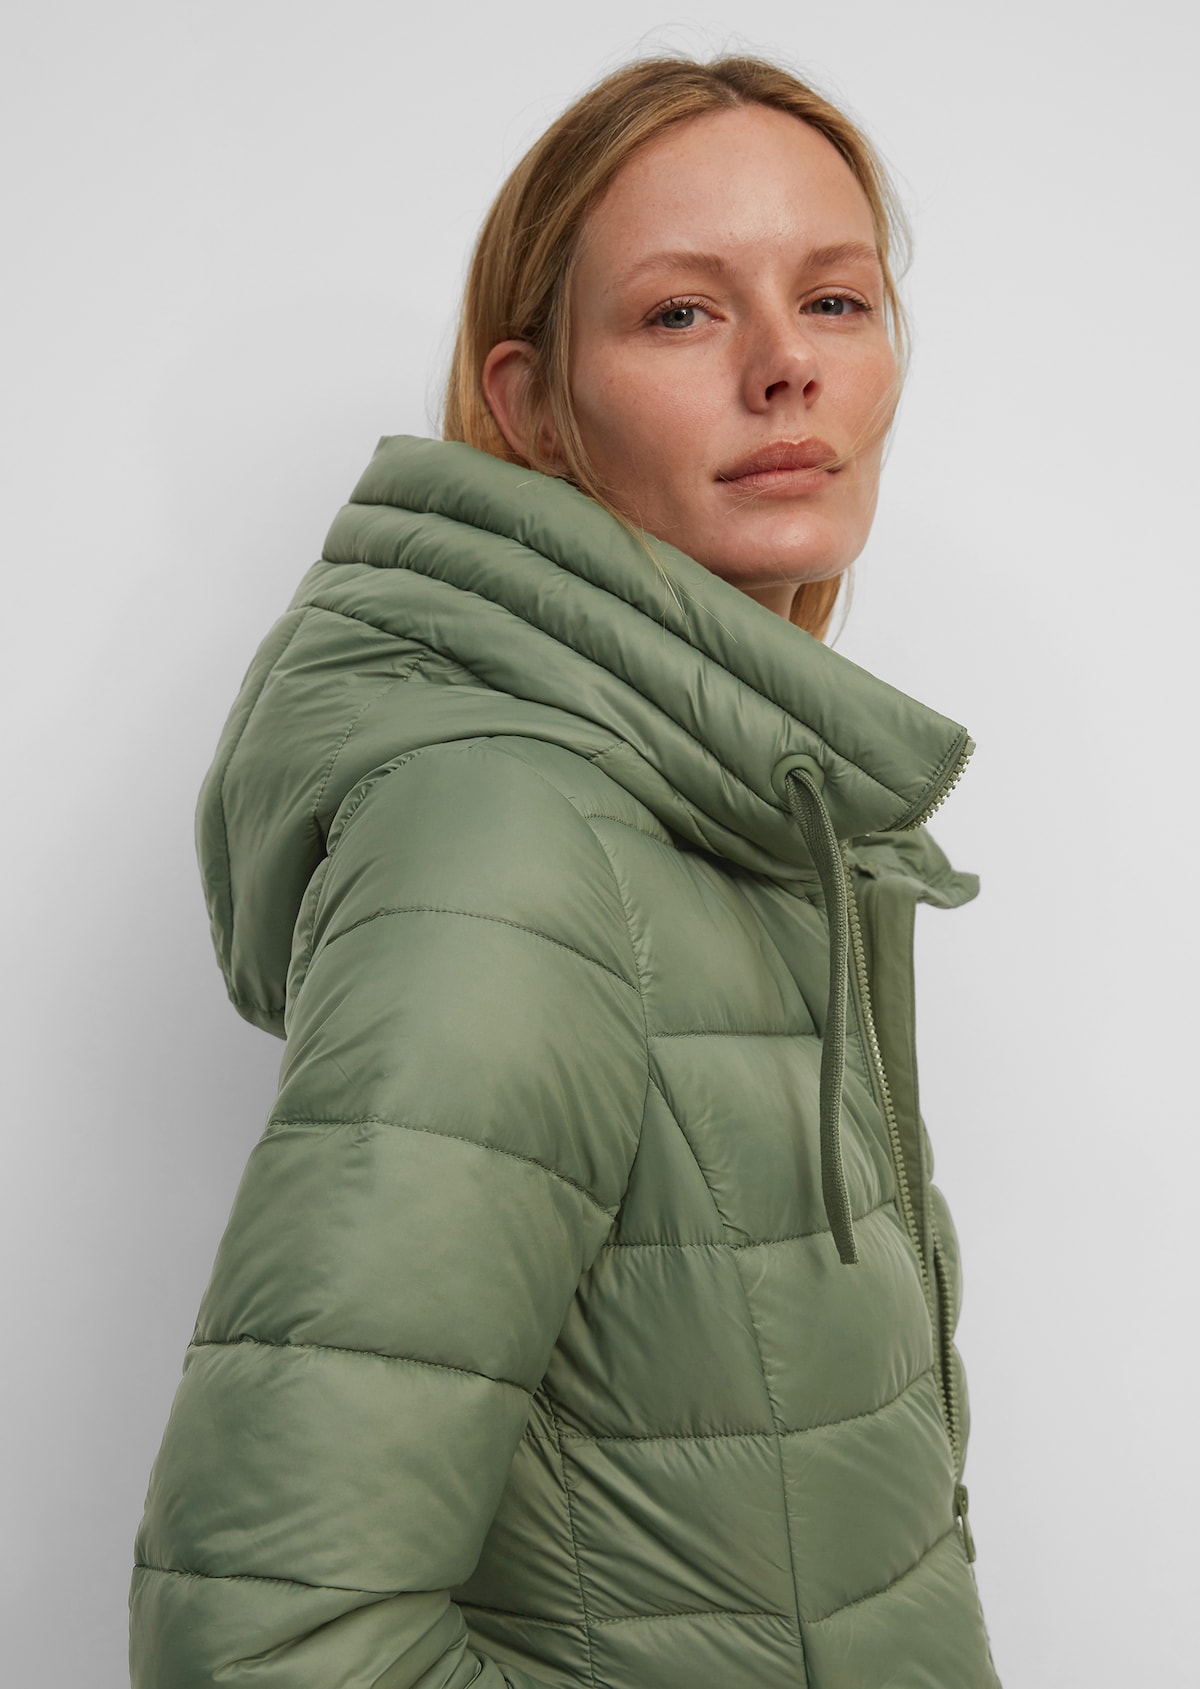 Tochi tree speaker Breathing Hooded quilted coat made of recycled materials - green | Coats | MARC O'POLO